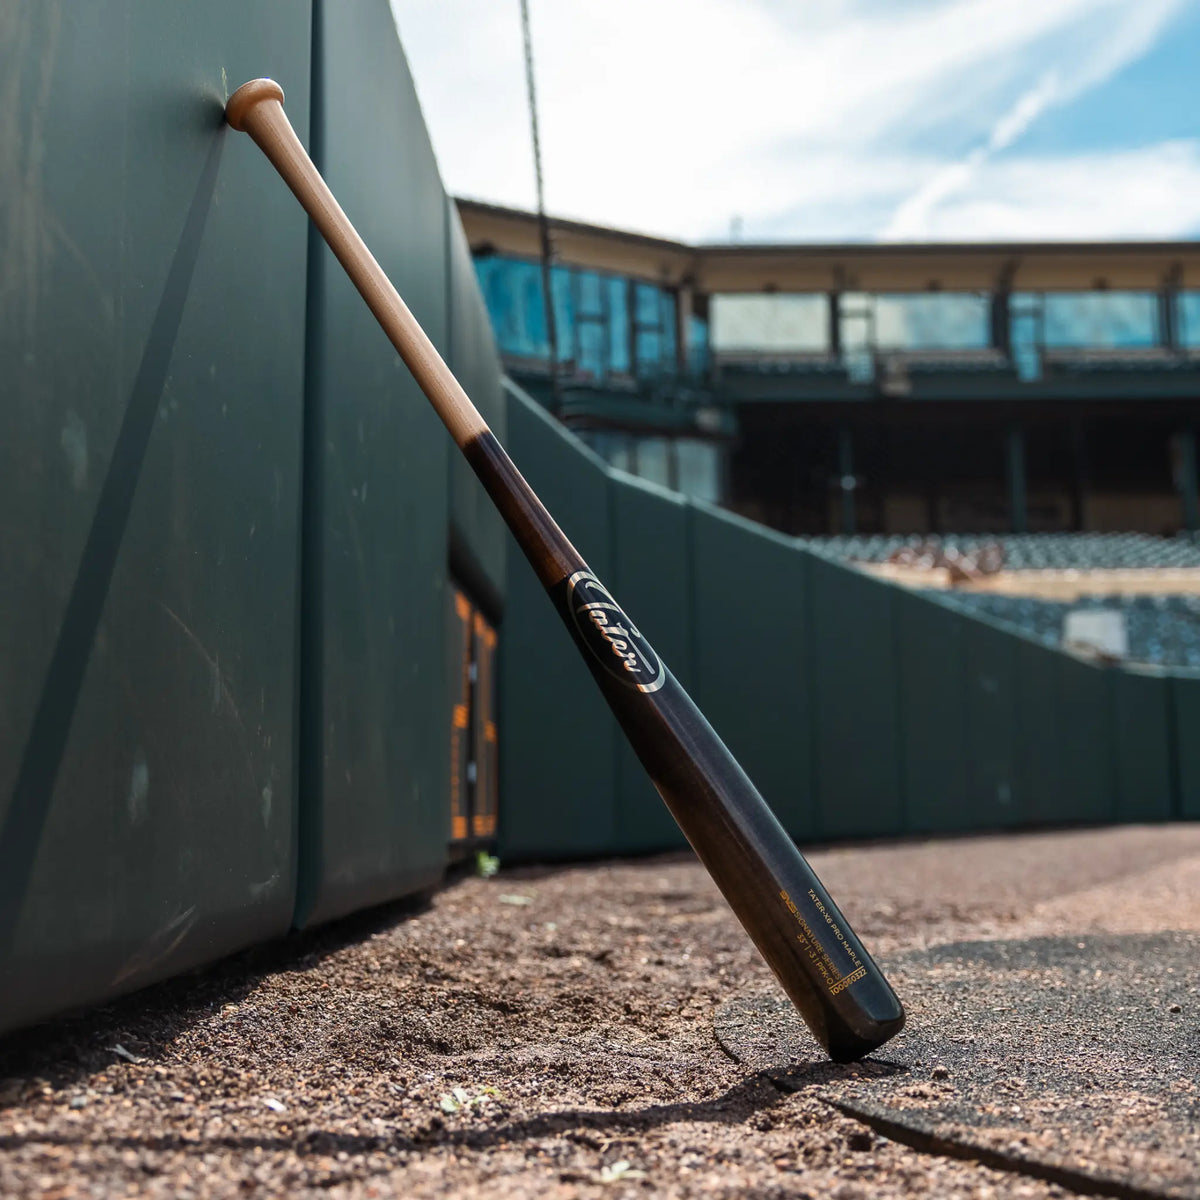 Premium maple wood baseball bat model X6 with a slight end-load, 32-33 inch, drop 3, resting against a dugout wall in a professional baseball stadium.